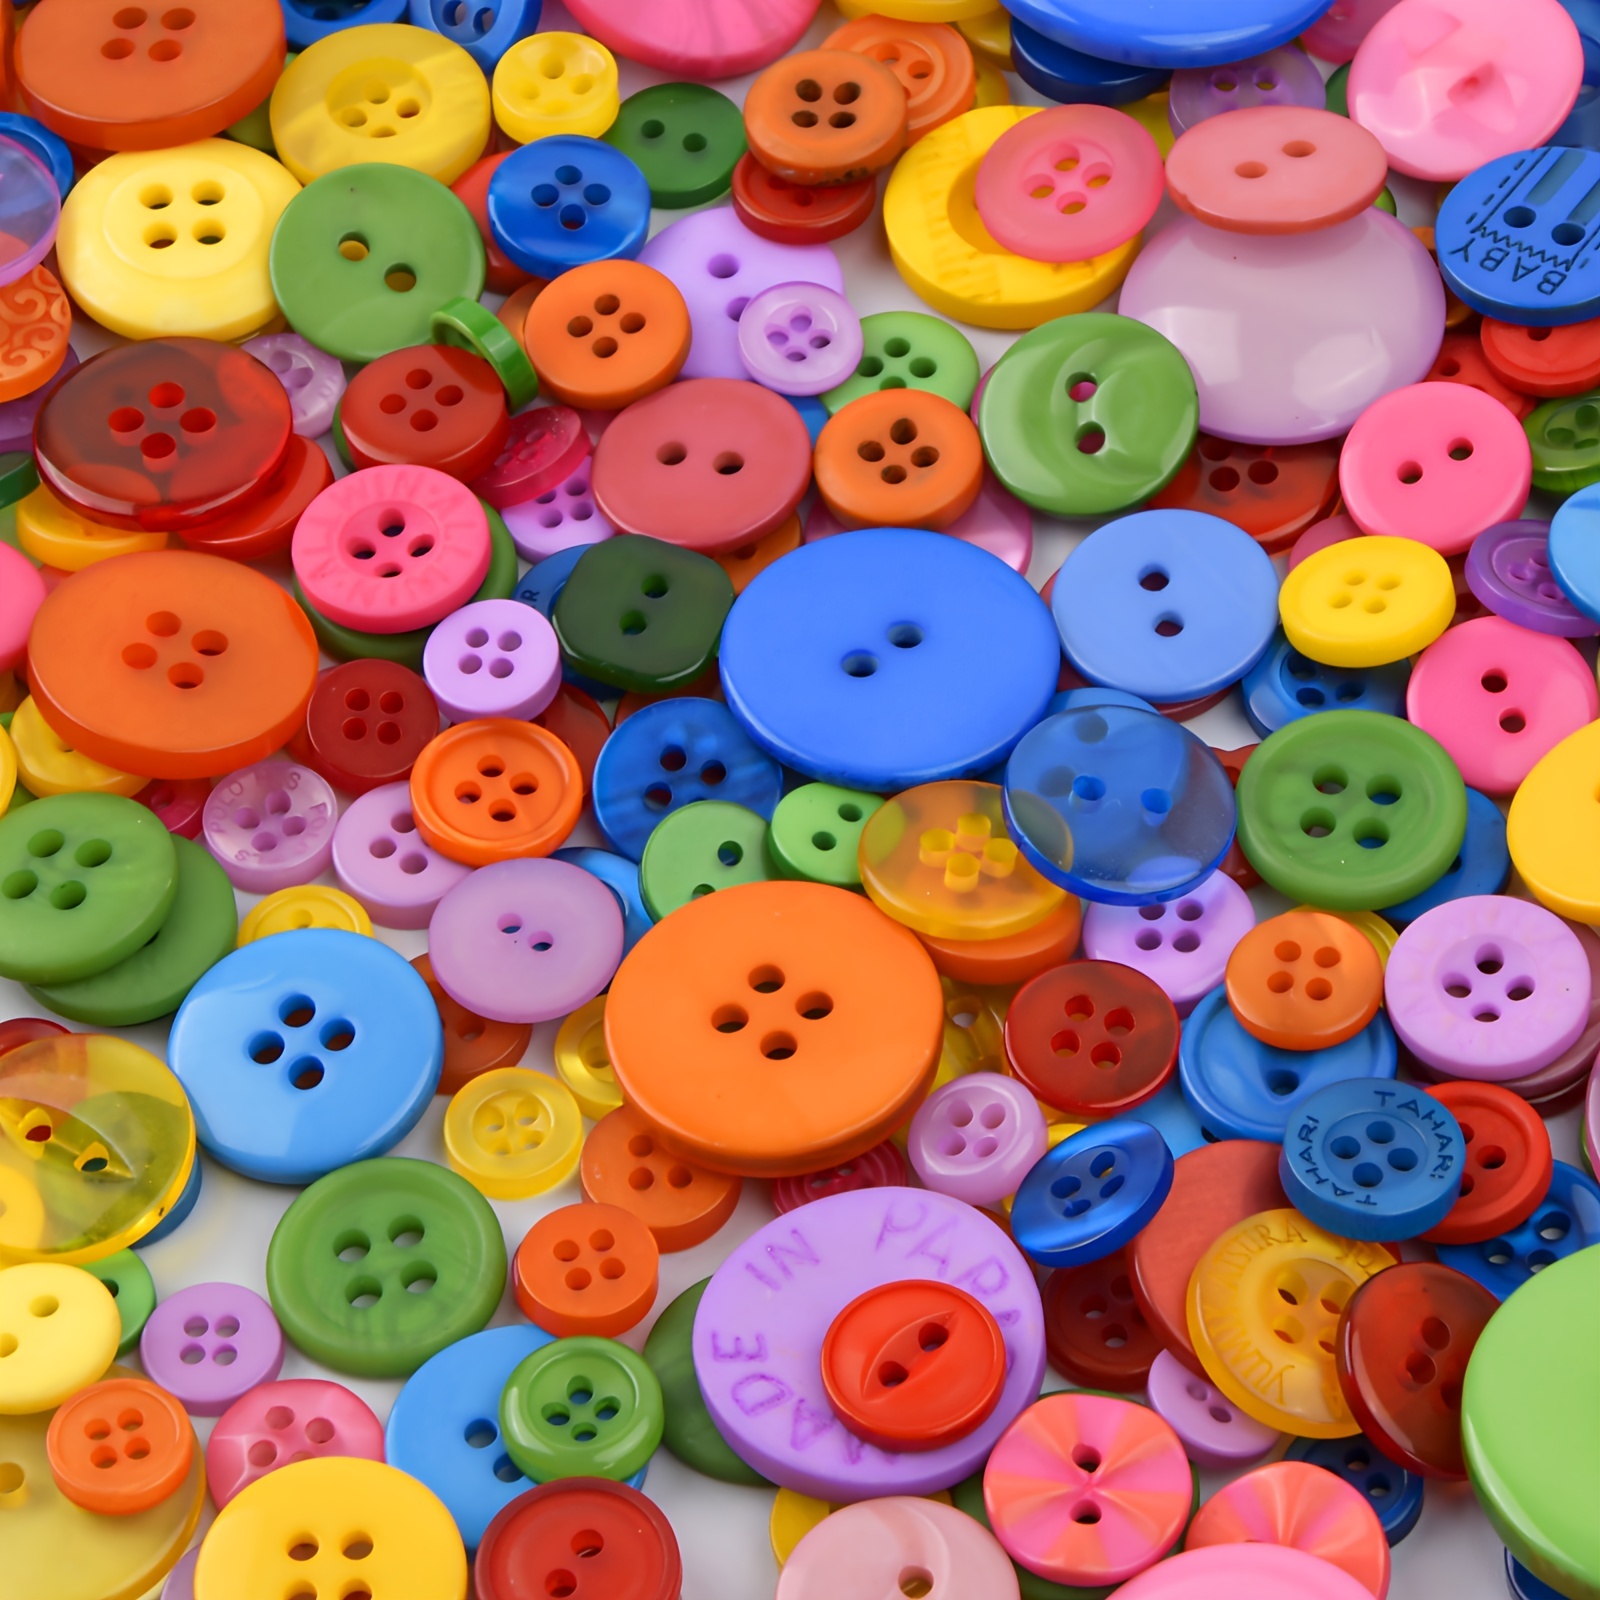 800 Pcs Button for Craft Mixed Colors Sewing Buttons Round Heart Star  Flower Buttons Assorted Sizes Resin Buttons for DIY Crafts Painting  Decoration